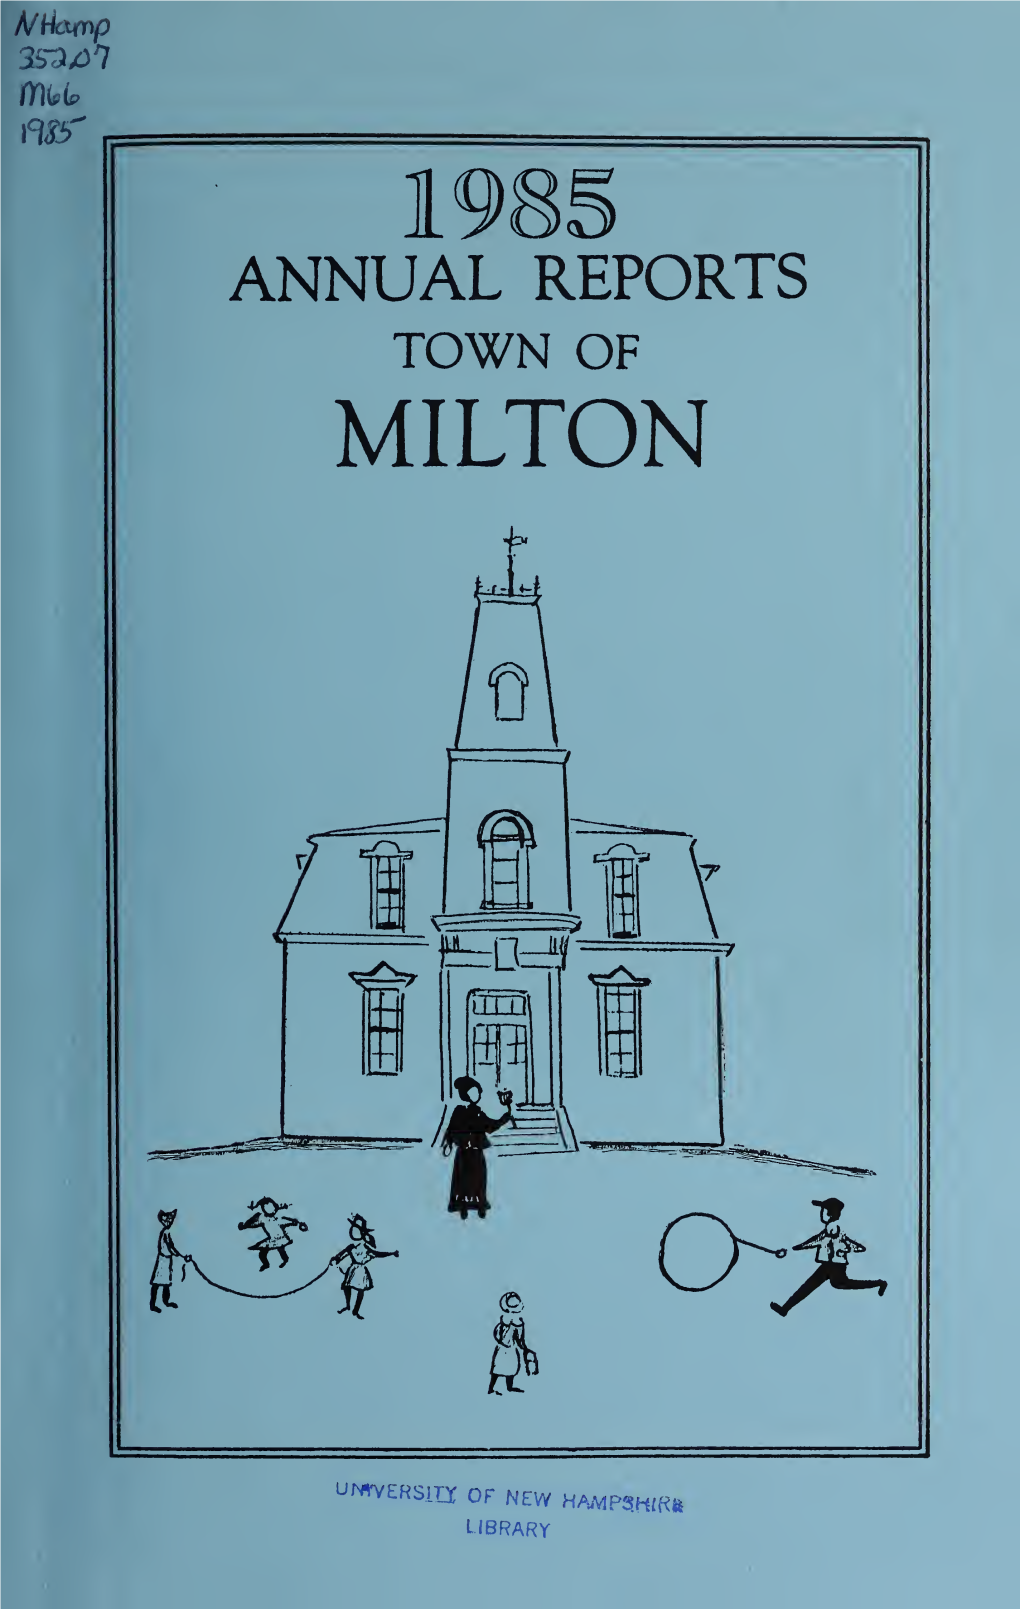 Annual Reports of the Town of Milton, New Hampshire for the Fiscal Year